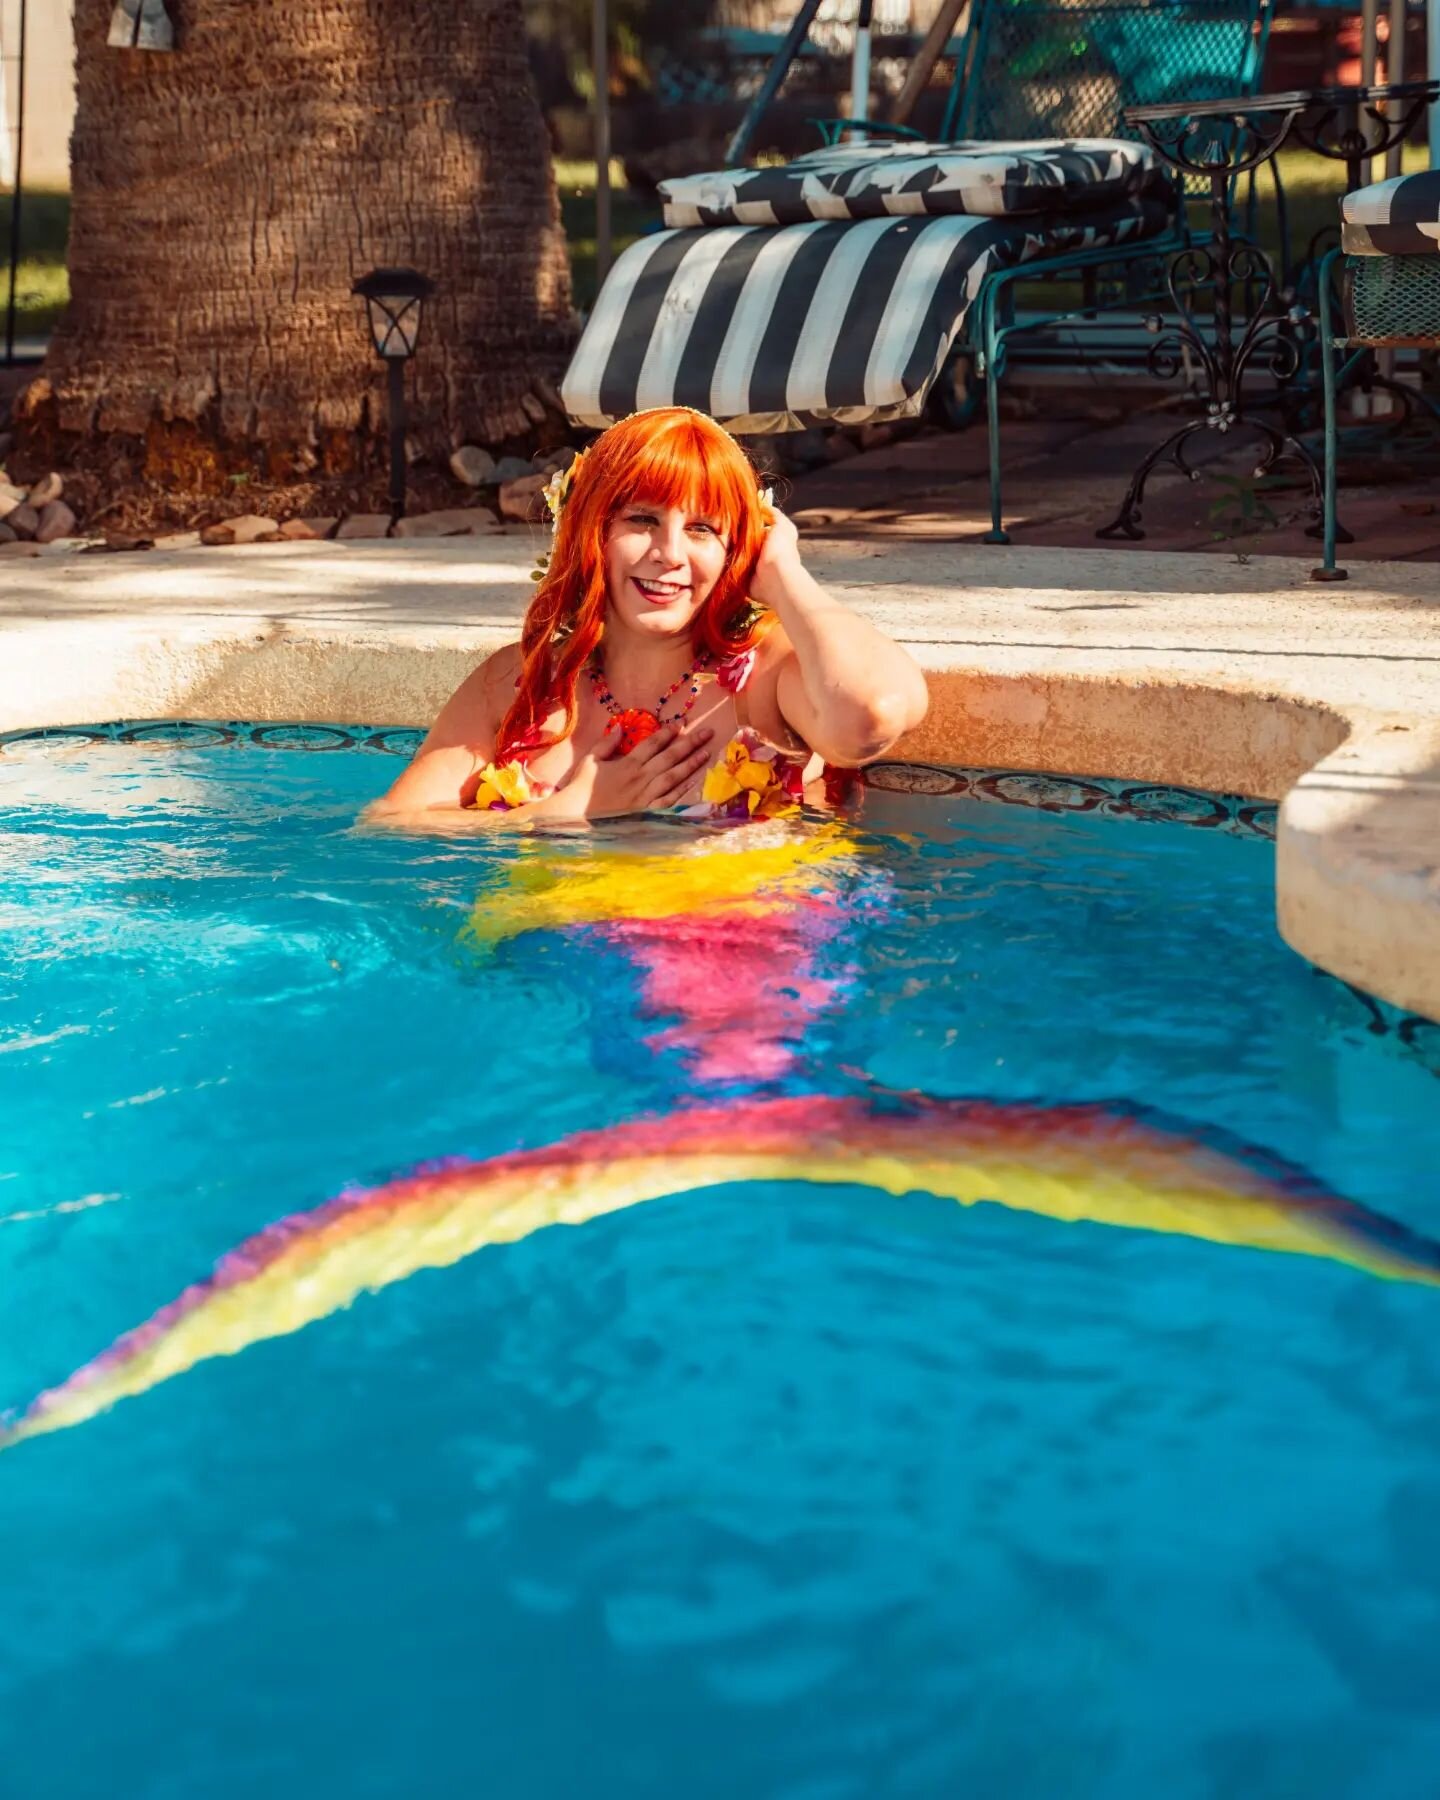 It's Monday! That means it's time for another #mermaidmonday post! Hope your week is off to a fintastic start! 

📸: @billy.taylor.visuals at the @azphotomeetups Last Splash event

Tail: @mertailor

#mermaid #mermaidperformer #phoenixaz #phoenixenter